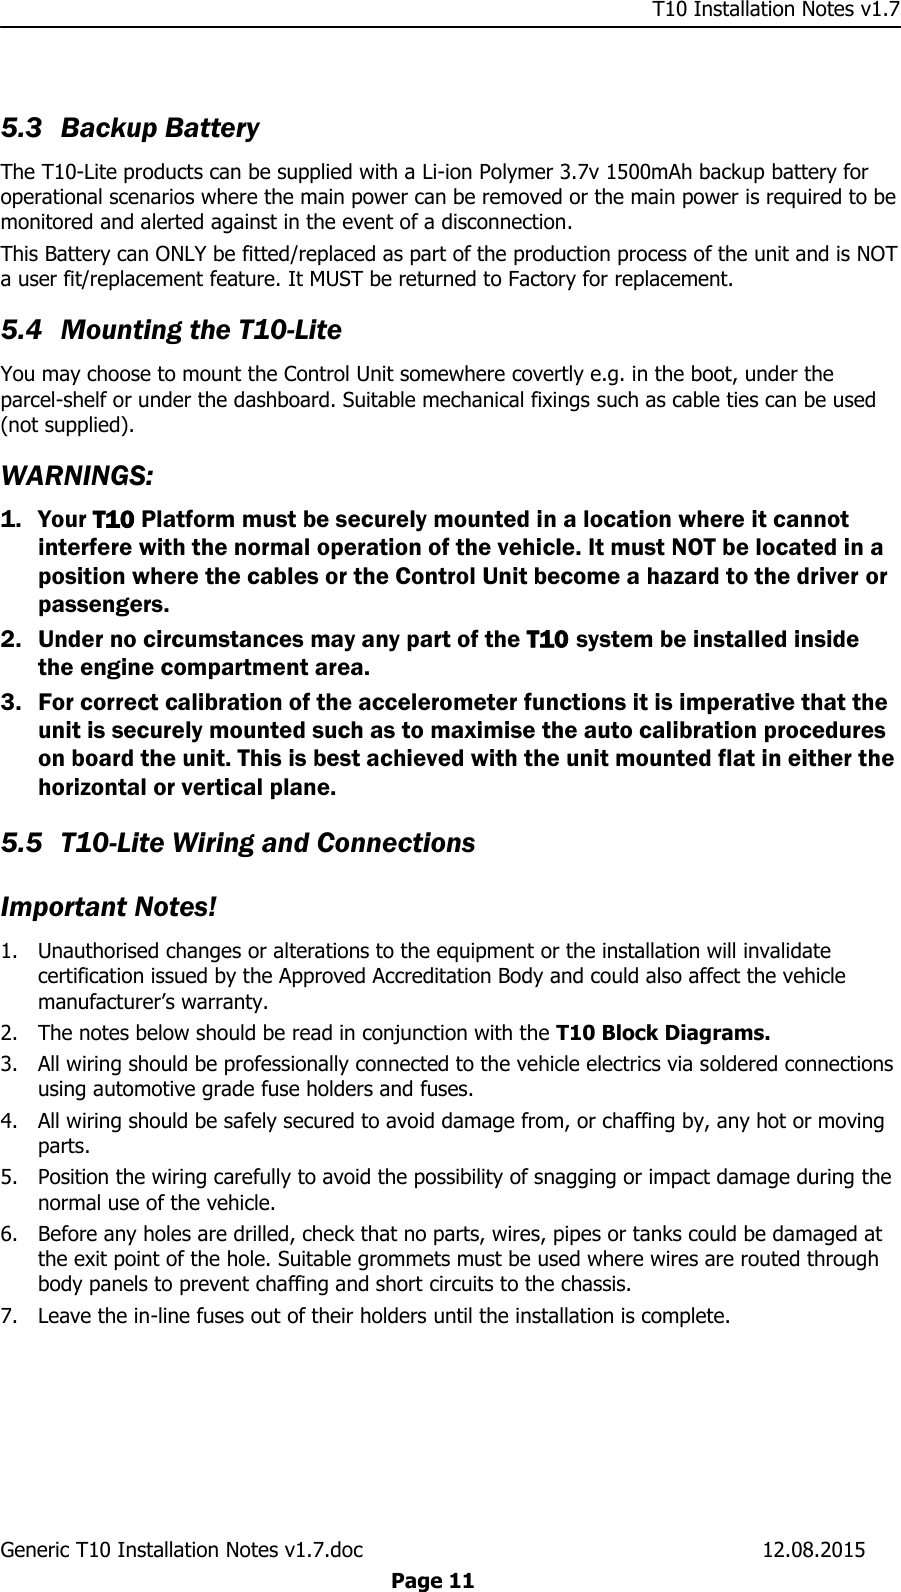     T10 Installation Notes v1.7 Generic T10 Installation Notes v1.7.doc    12.08.2015  Page 11  5.3 Backup Battery The T10-Lite products can be supplied with a Li-ion Polymer 3.7v 1500mAh backup battery for operational scenarios where the main power can be removed or the main power is required to be monitored and alerted against in the event of a disconnection. This Battery can ONLY be fitted/replaced as part of the production process of the unit and is NOT a user fit/replacement feature. It MUST be returned to Factory for replacement. 5.4 Mounting the T10-Lite You may choose to mount the Control Unit somewhere covertly e.g. in the boot, under the parcel-shelf or under the dashboard. Suitable mechanical fixings such as cable ties can be used (not supplied). WARNINGS:  1. Your T10 Platform must be securely mounted in a location where it cannot interfere with the normal operation of the vehicle. It must NOT be located in a position where the cables or the Control Unit become a hazard to the driver or passengers.  2. Under no circumstances may any part of the T10 system be installed inside the engine compartment area. 3. For correct calibration of the accelerometer functions it is imperative that the unit is securely mounted such as to maximise the auto calibration procedures on board the unit. This is best achieved with the unit mounted flat in either the horizontal or vertical plane.  5.5 T10-Lite Wiring and Connections Important Notes! 1. Unauthorised changes or alterations to the equipment or the installation will invalidate certification issued by the Approved Accreditation Body and could also affect the vehicle manufacturer’s warranty. 2. The notes below should be read in conjunction with the T10 Block Diagrams. 3. All wiring should be professionally connected to the vehicle electrics via soldered connections using automotive grade fuse holders and fuses. 4. All wiring should be safely secured to avoid damage from, or chaffing by, any hot or moving parts. 5. Position the wiring carefully to avoid the possibility of snagging or impact damage during the normal use of the vehicle. 6. Before any holes are drilled, check that no parts, wires, pipes or tanks could be damaged at the exit point of the hole. Suitable grommets must be used where wires are routed through body panels to prevent chaffing and short circuits to the chassis. 7. Leave the in-line fuses out of their holders until the installation is complete. 